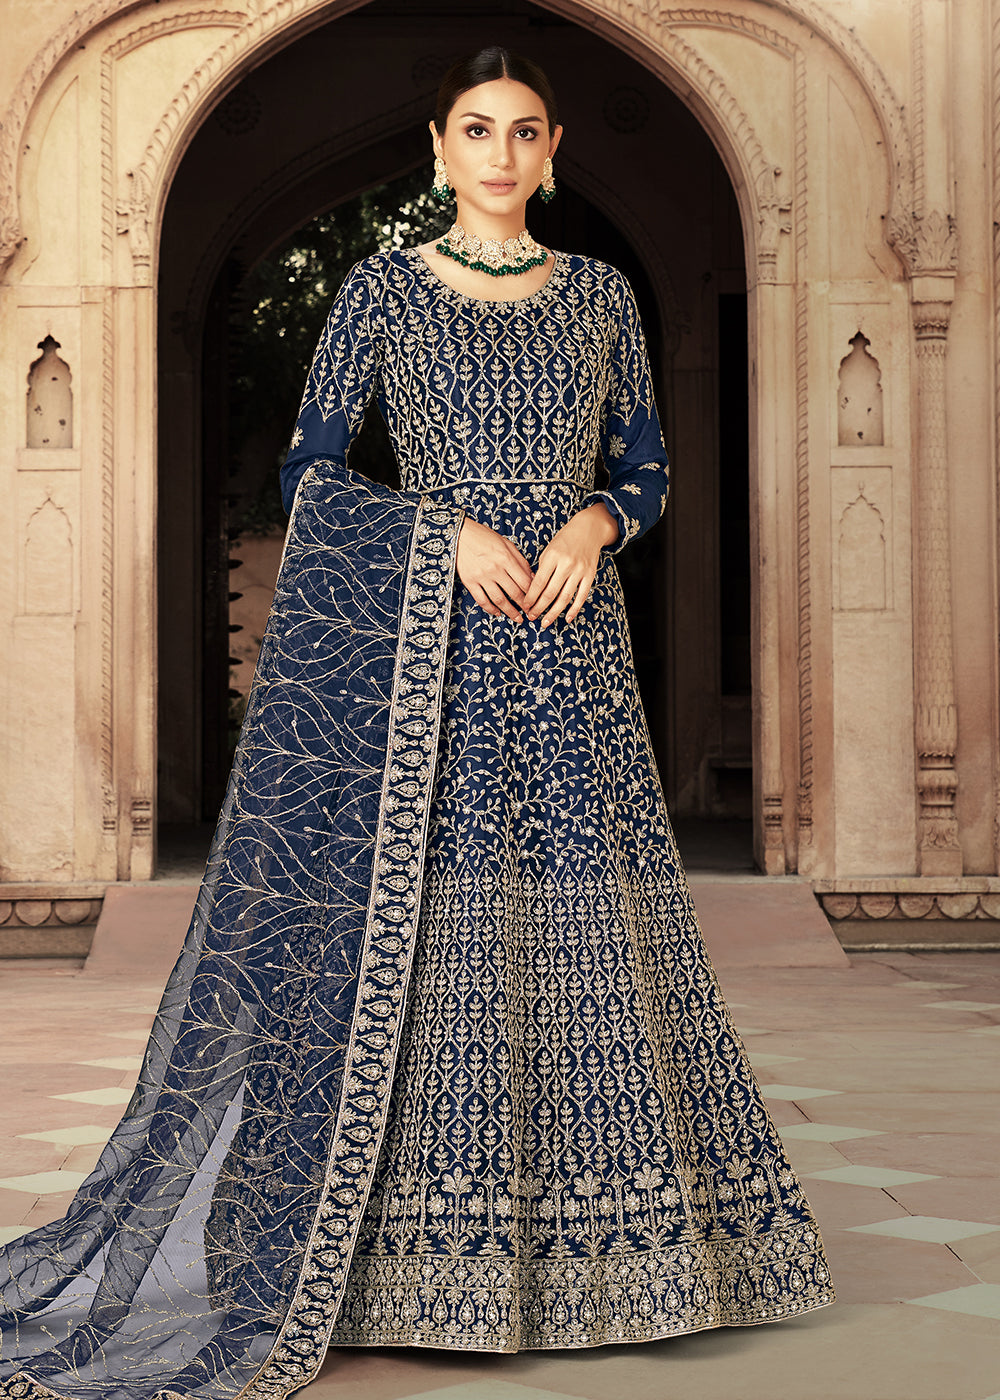 Buy Now Blue Zarkan Diamond Embroidered Bridal Anarkali Suit Online in Canada at Empress Clothing.